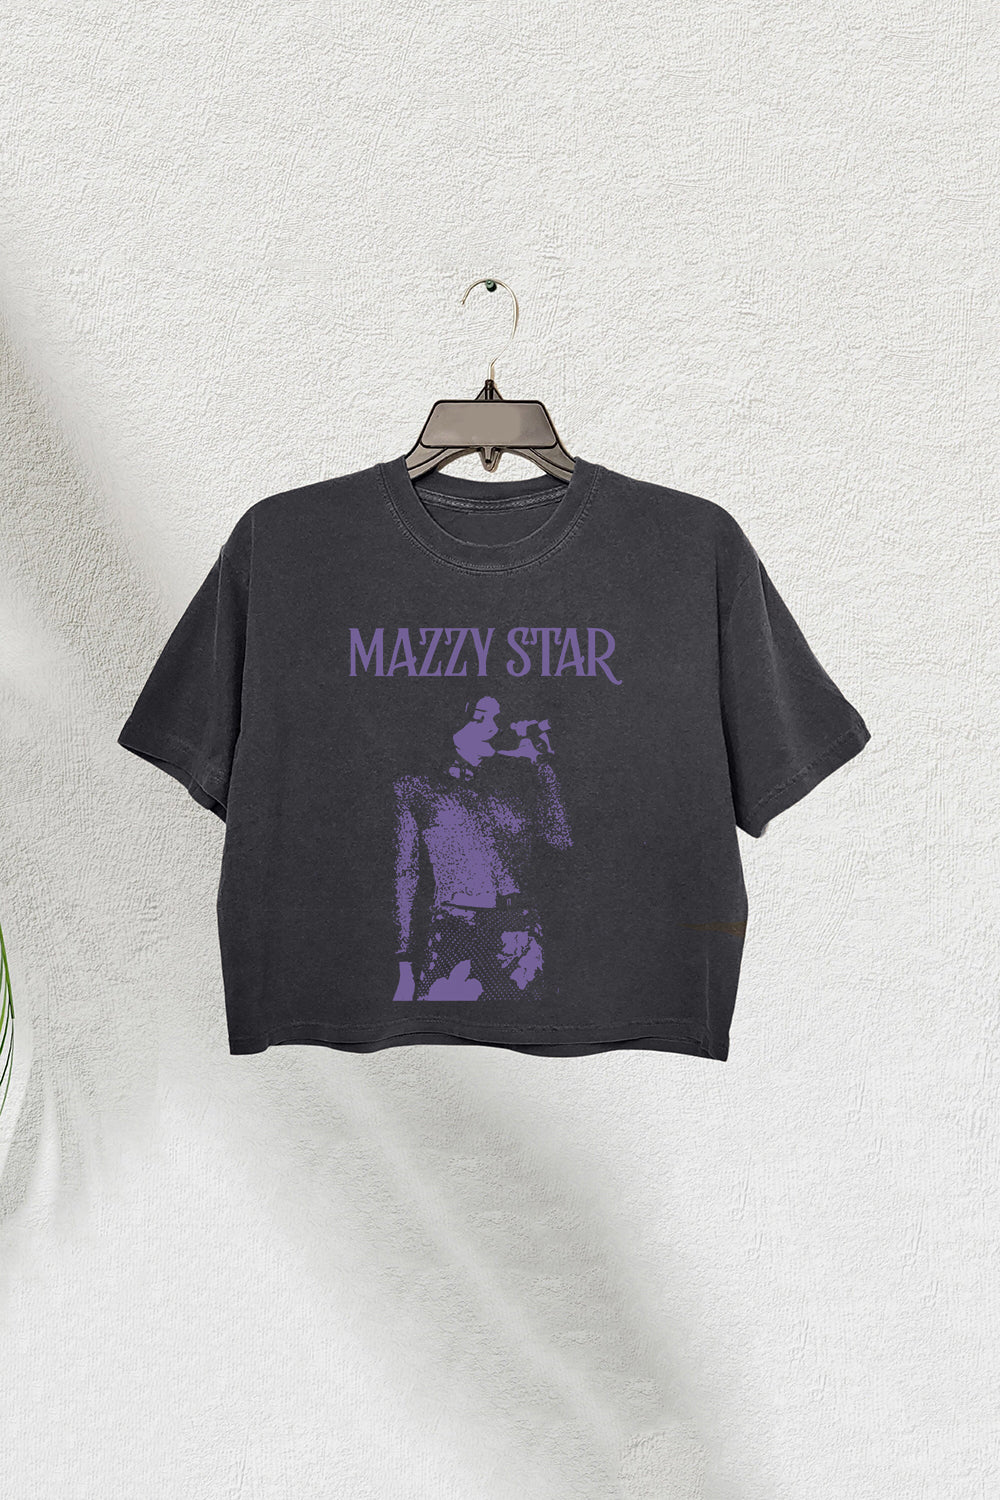 Mazzy Star Aesthetic Inpsired Crop Tee For Women